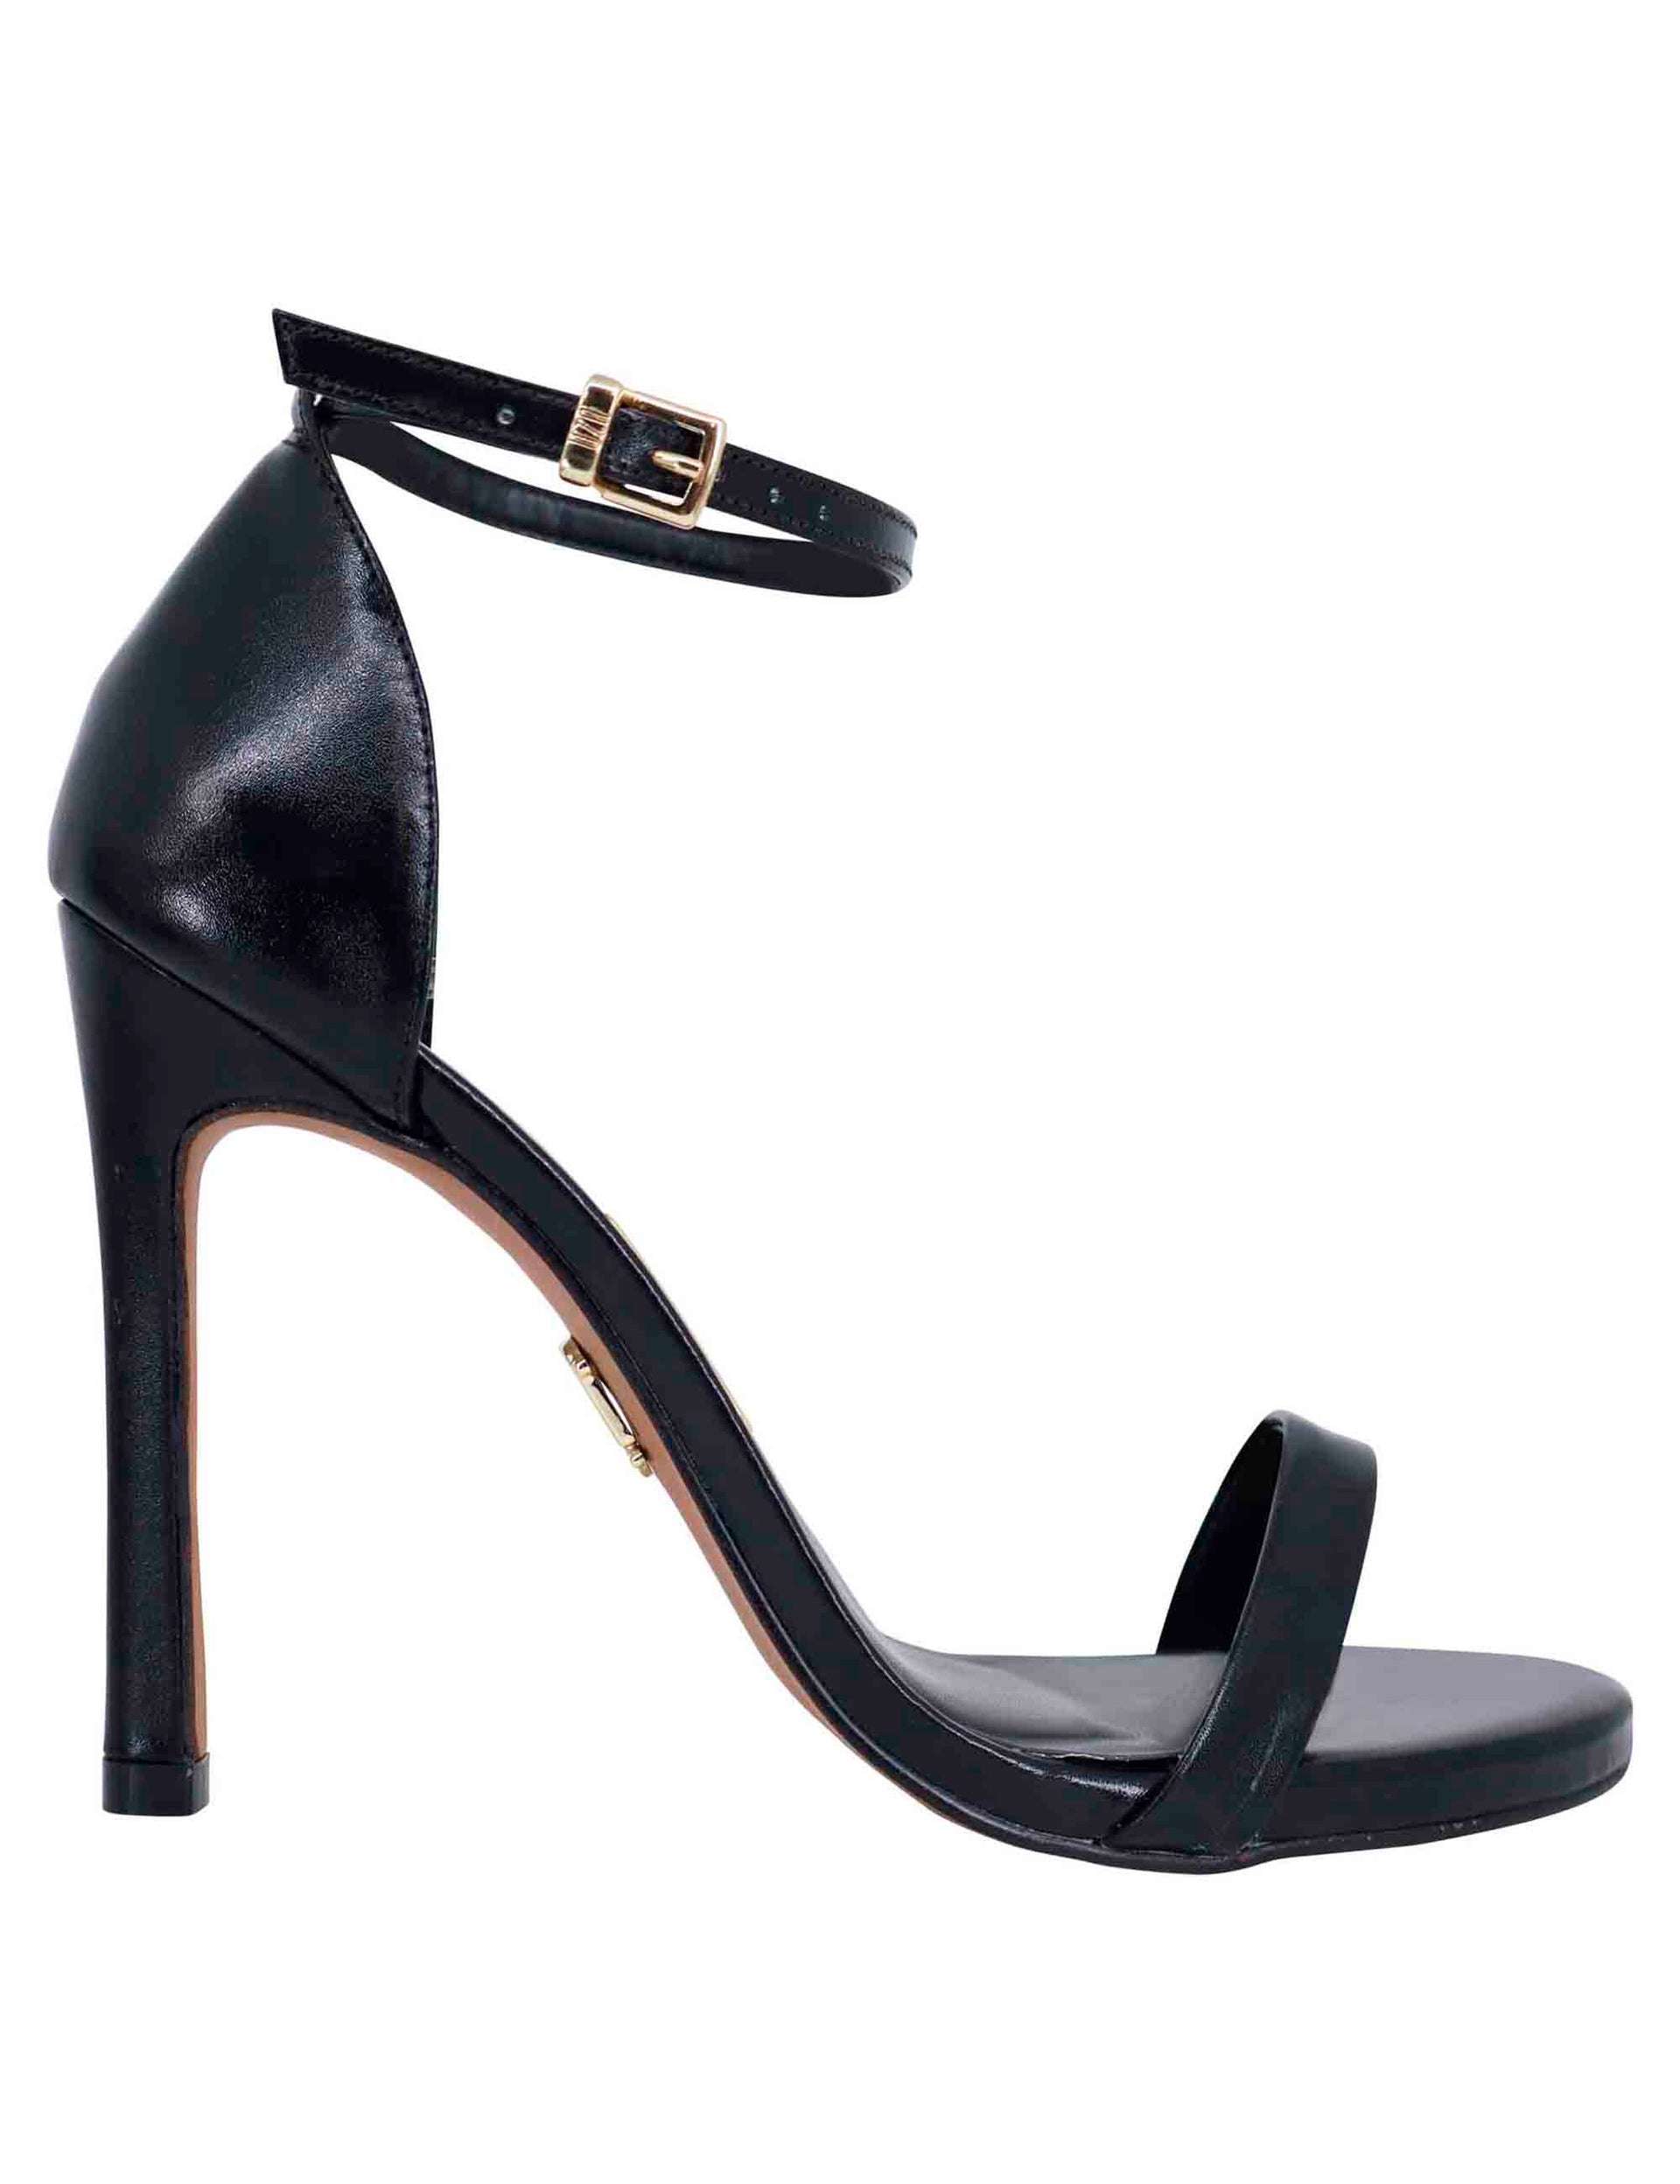 Women's sandals in black leather with high heel and ankle strap